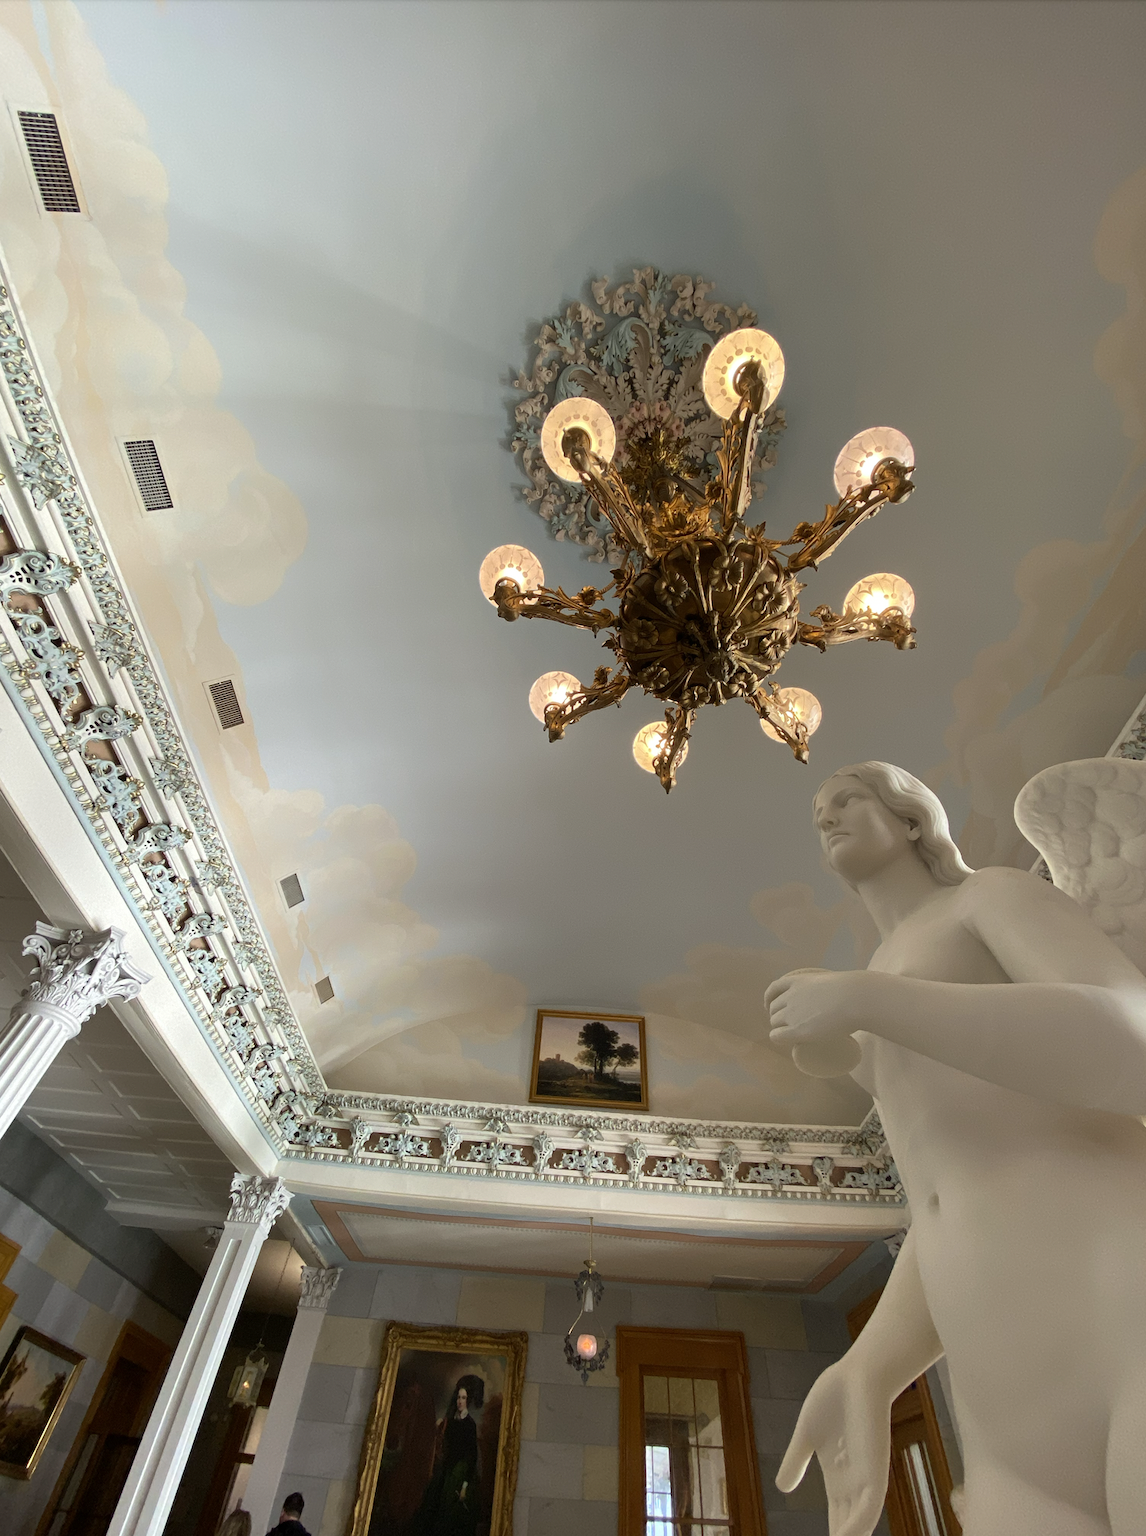 The Belmont Mansion ceiling